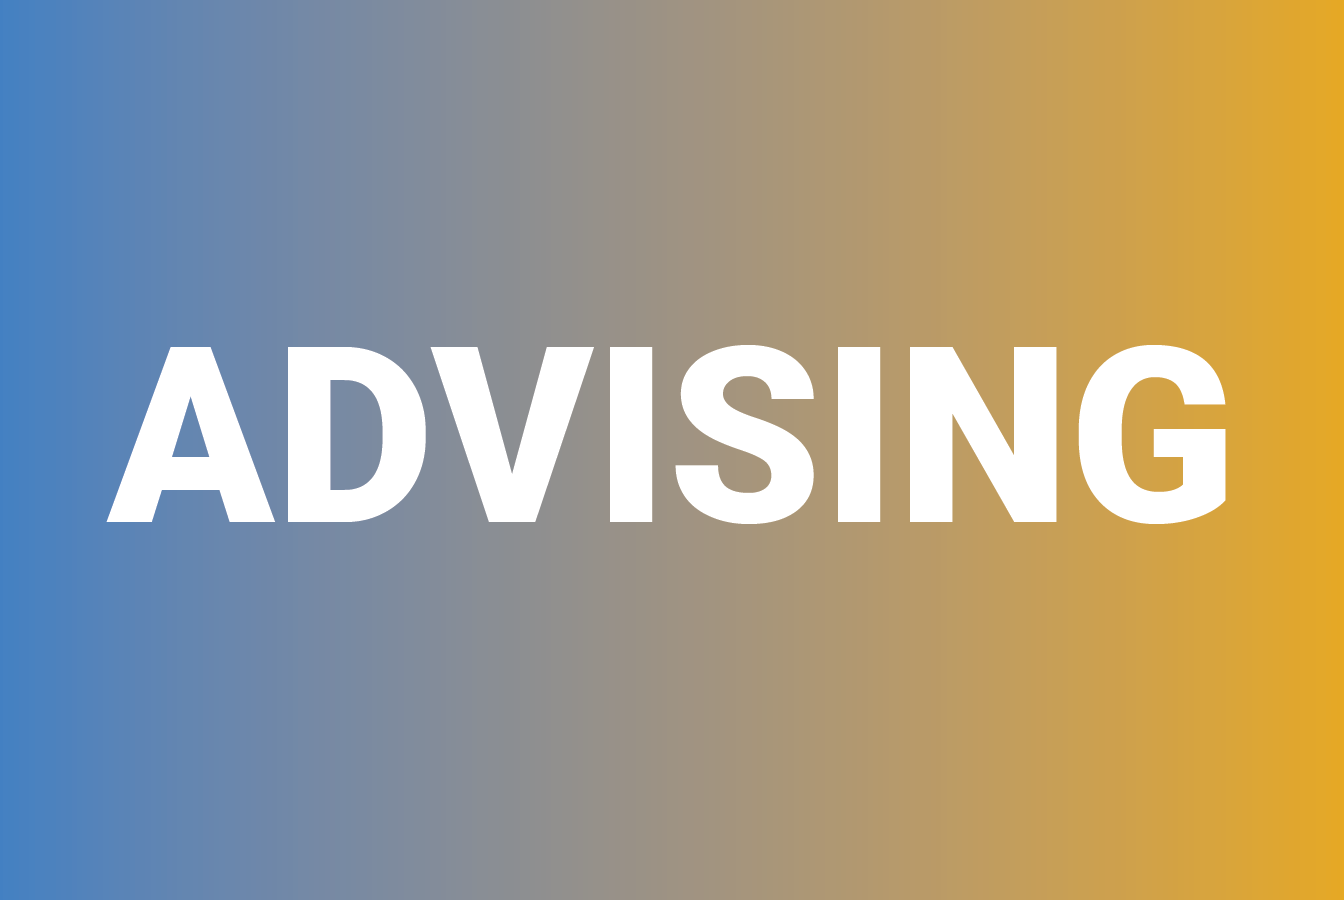 A decorative image with the text "Advising"